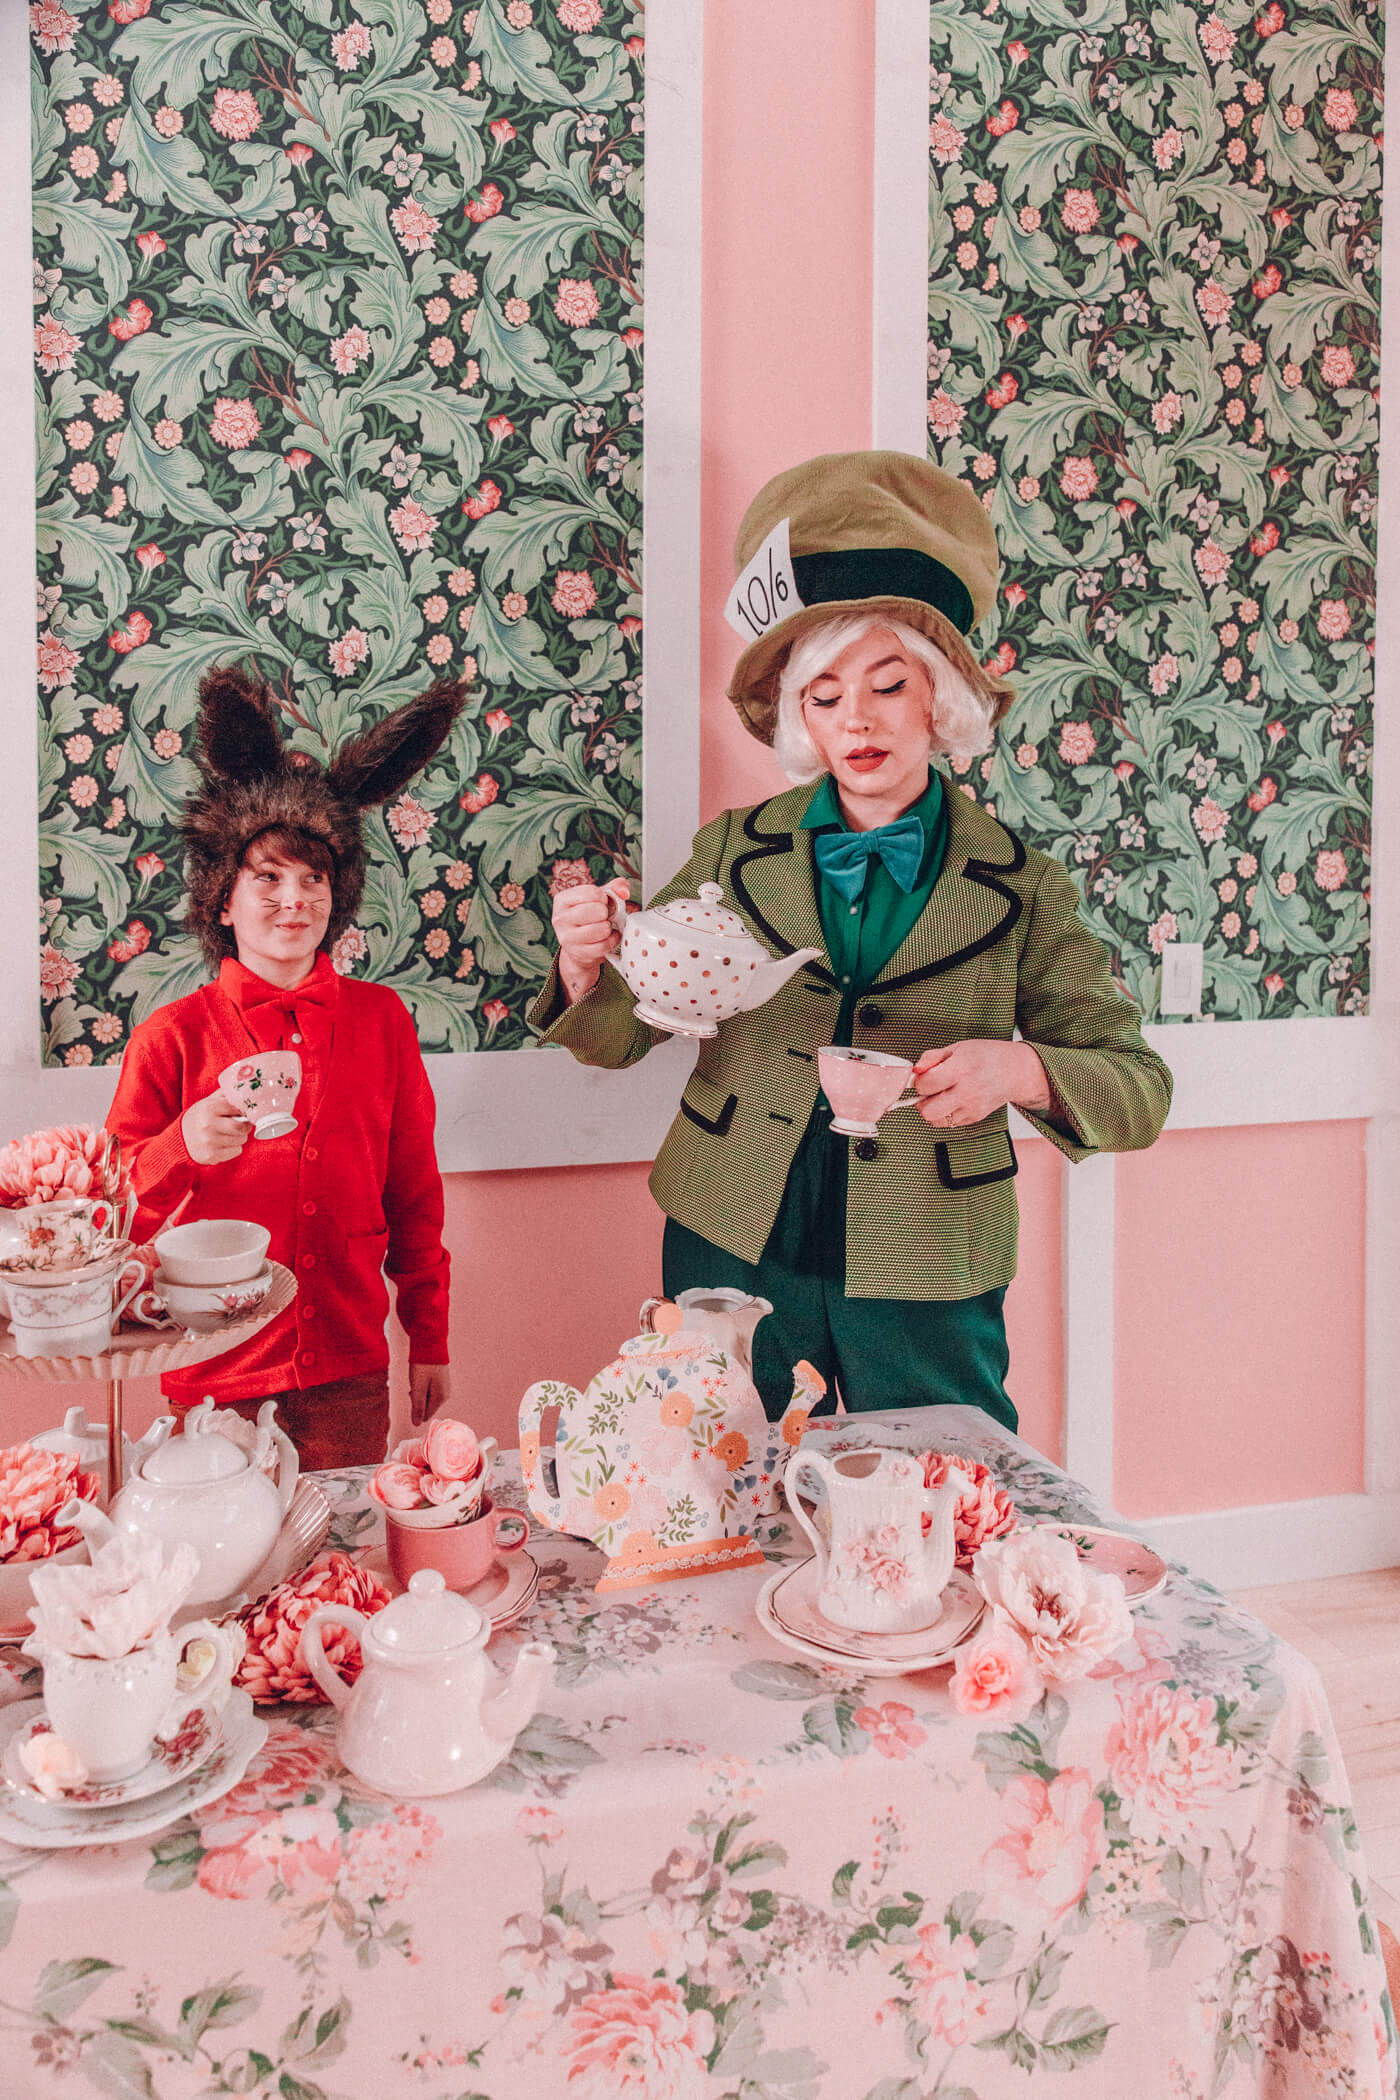 March Hare and Mad Hatter Costumes surrounded with tea setup